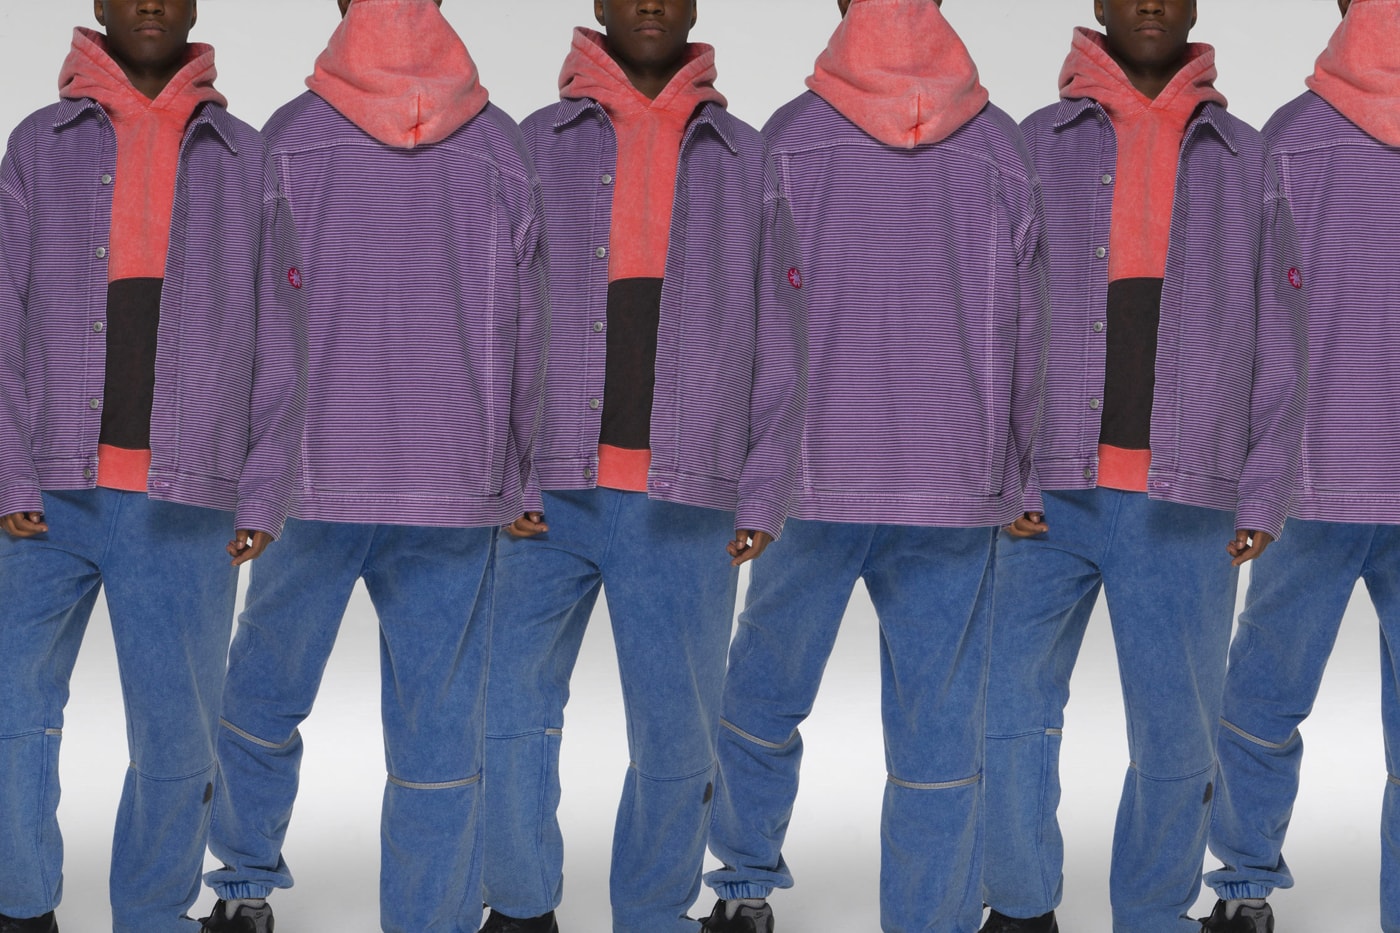 Cav Empt Spring Summer 2019 Collection Lookbook Toby Feltwell Sk8thing Jacket Hoodie Sweater Beanie Pants socks bags scarf t shirt crewneck shorts